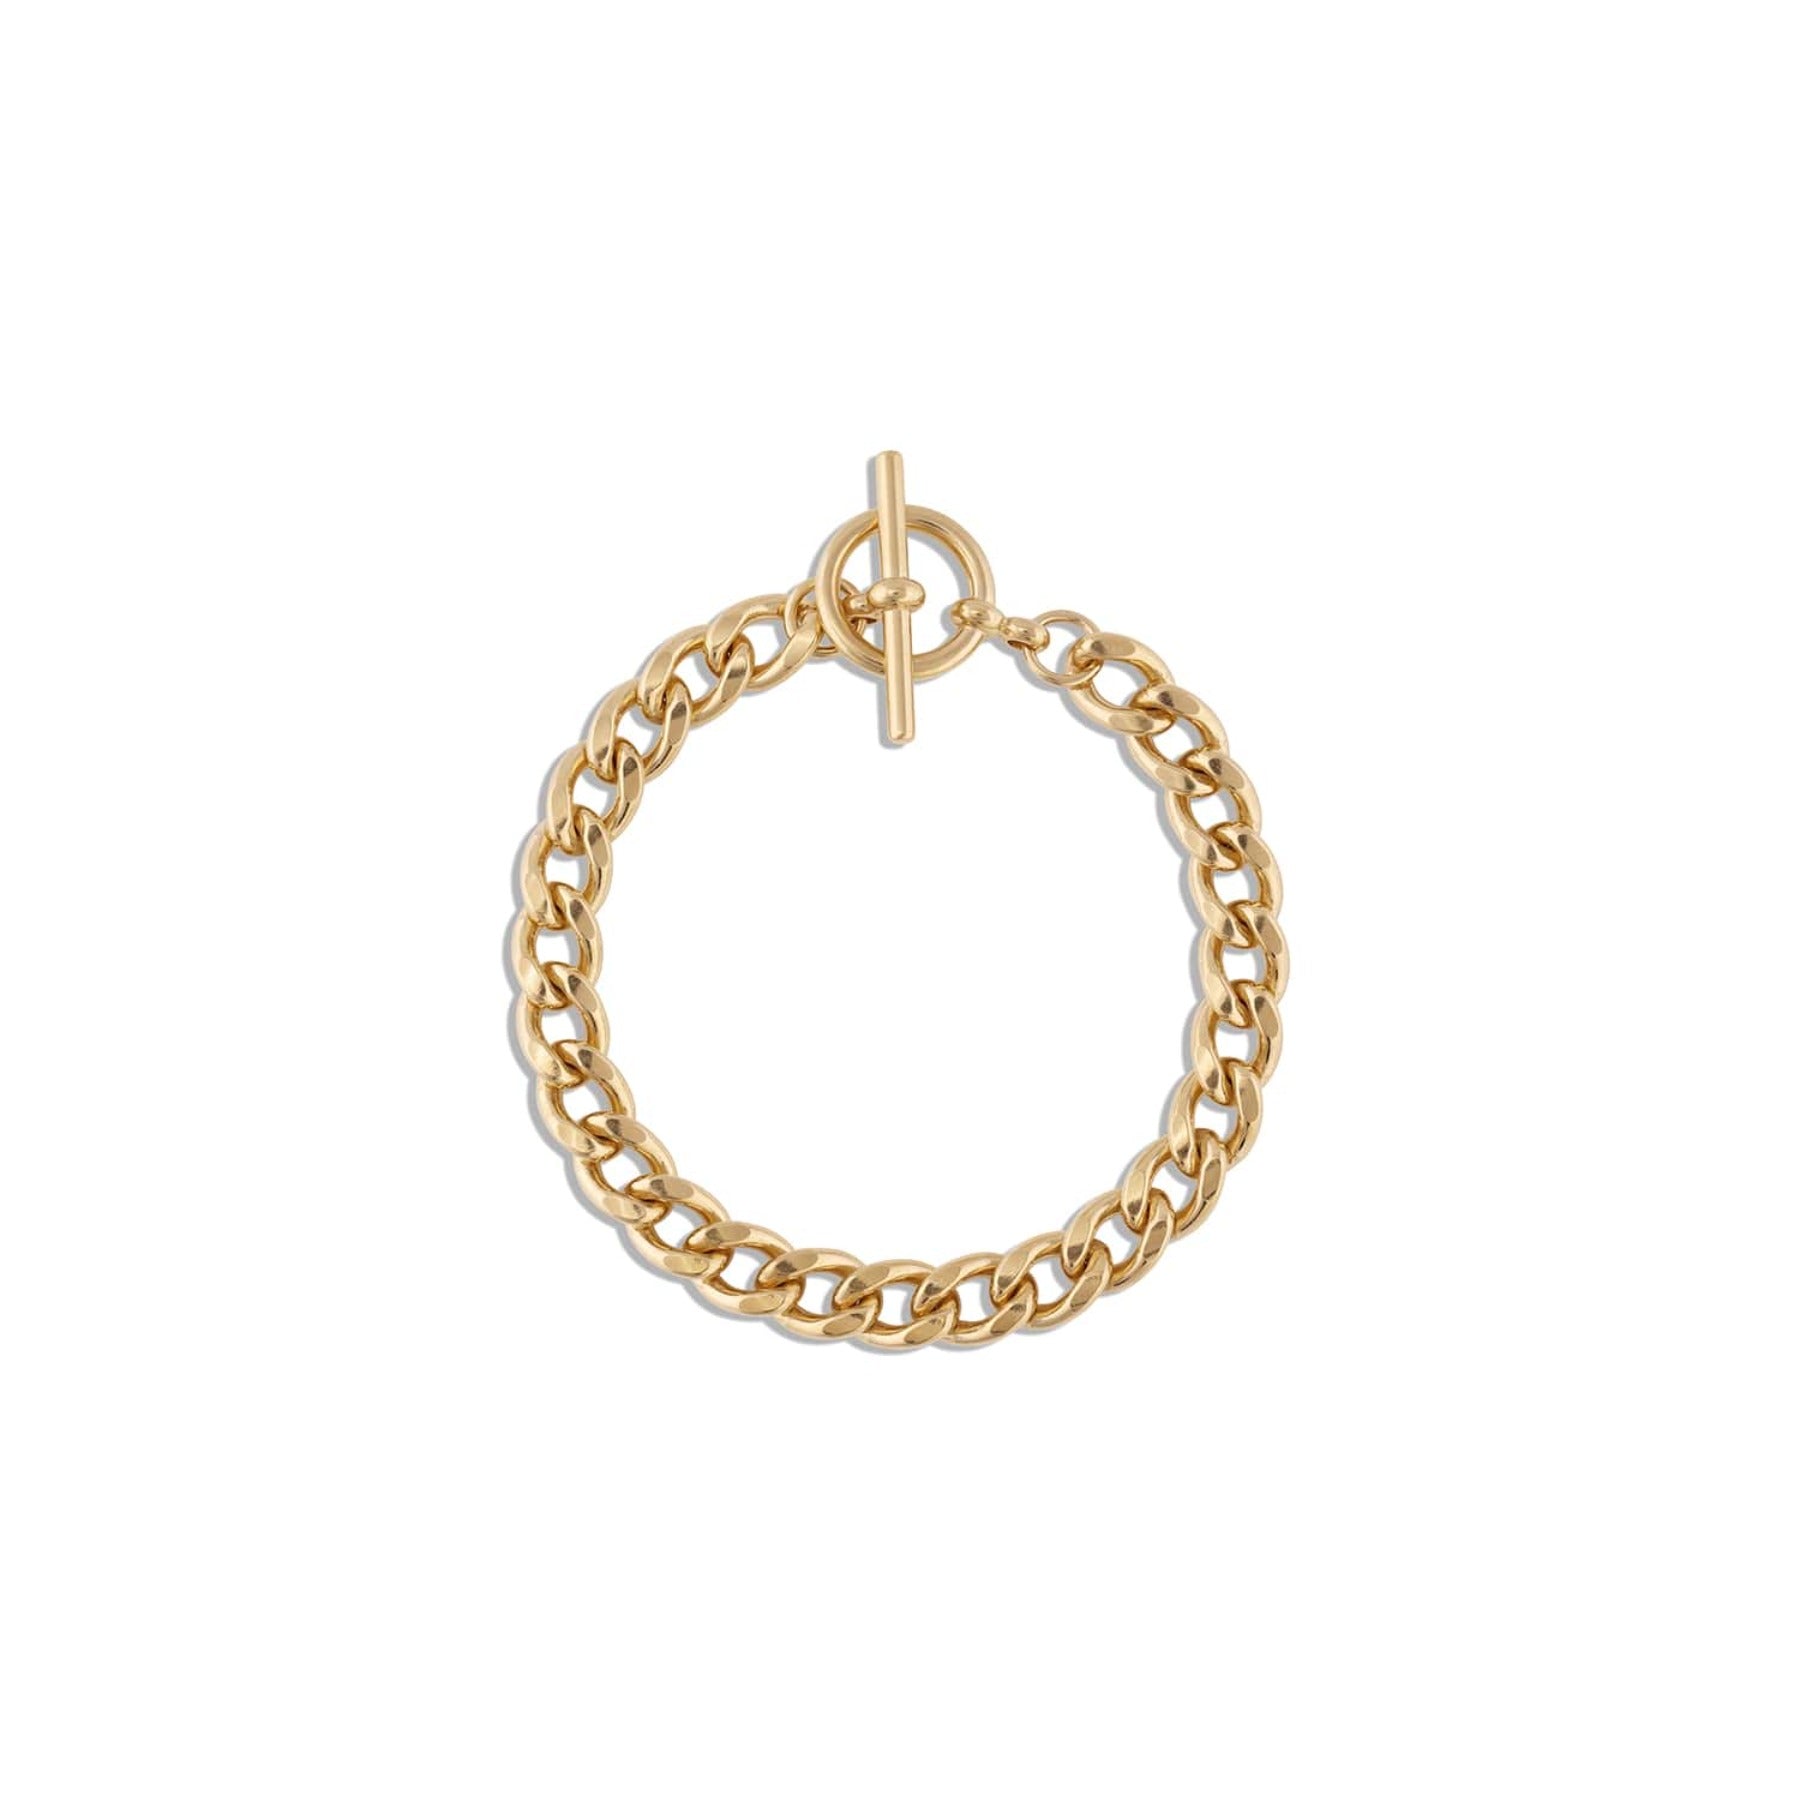 Flat curb chain bracelet with a toggle clasp in 18k gold vermeil.